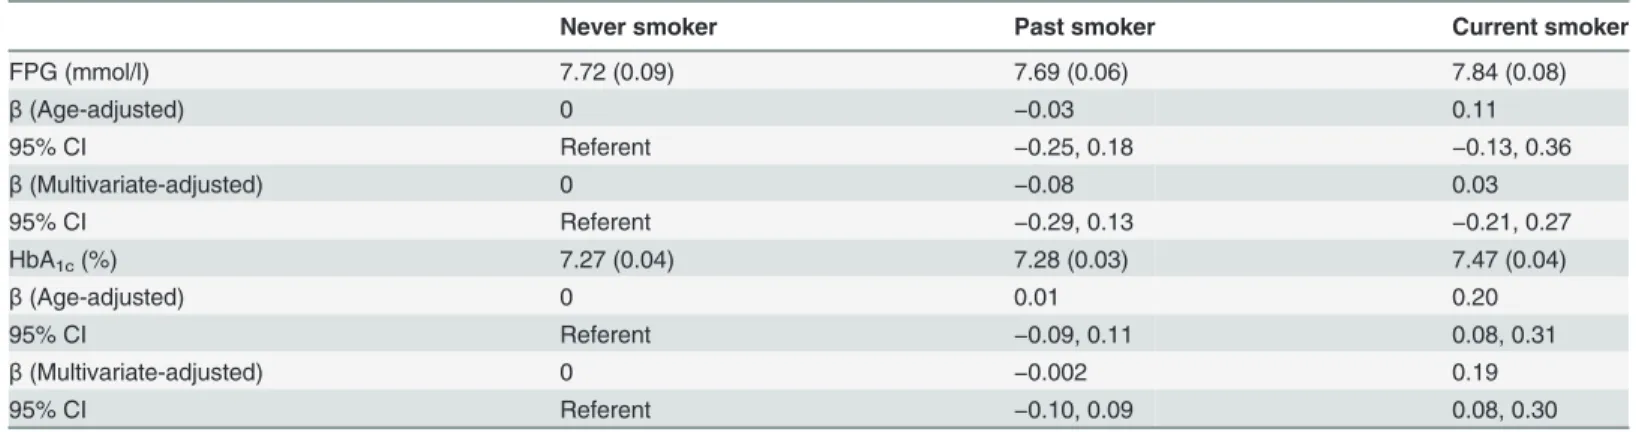 Table 2. Age-adjusted mean values and multivariate-adjusted partial regression coefficients (95% CIs) of FPG and HbA 1c according to smoking status.